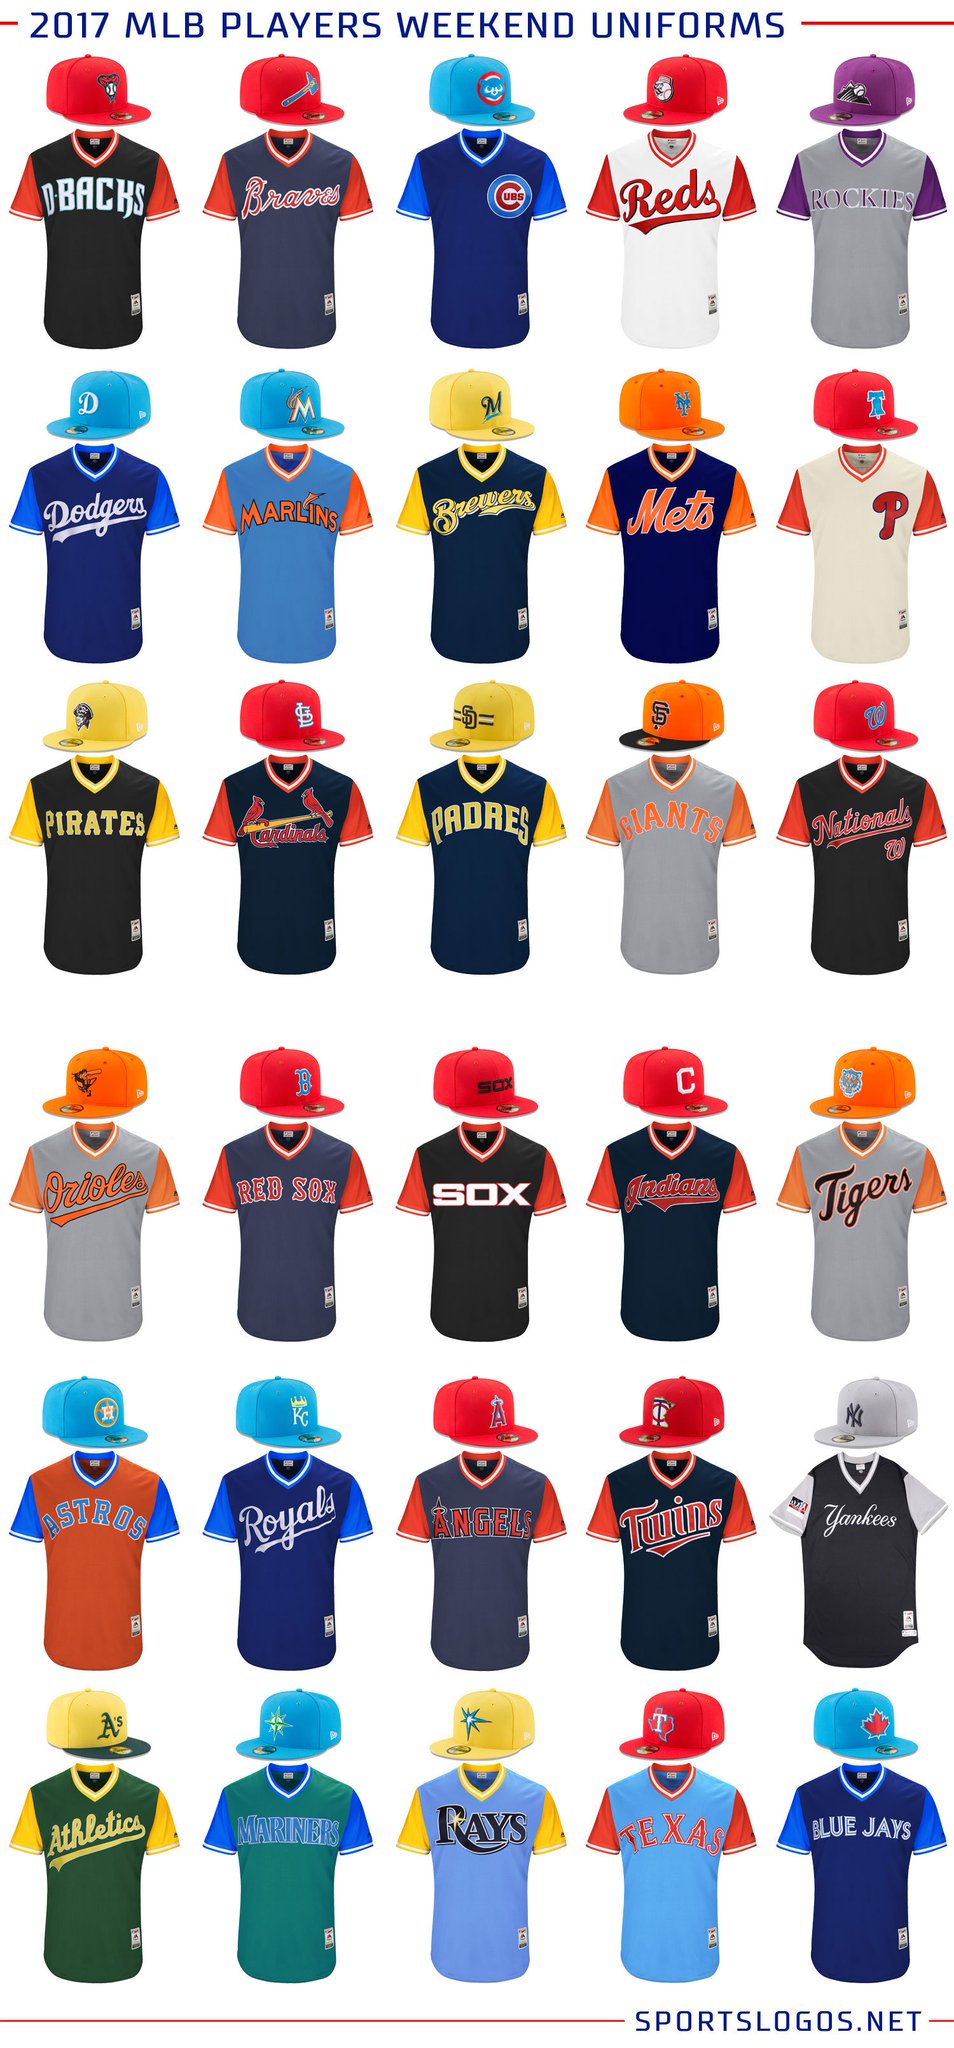 Check out all 30 MLB teams' colorful uniforms for Players Weekend